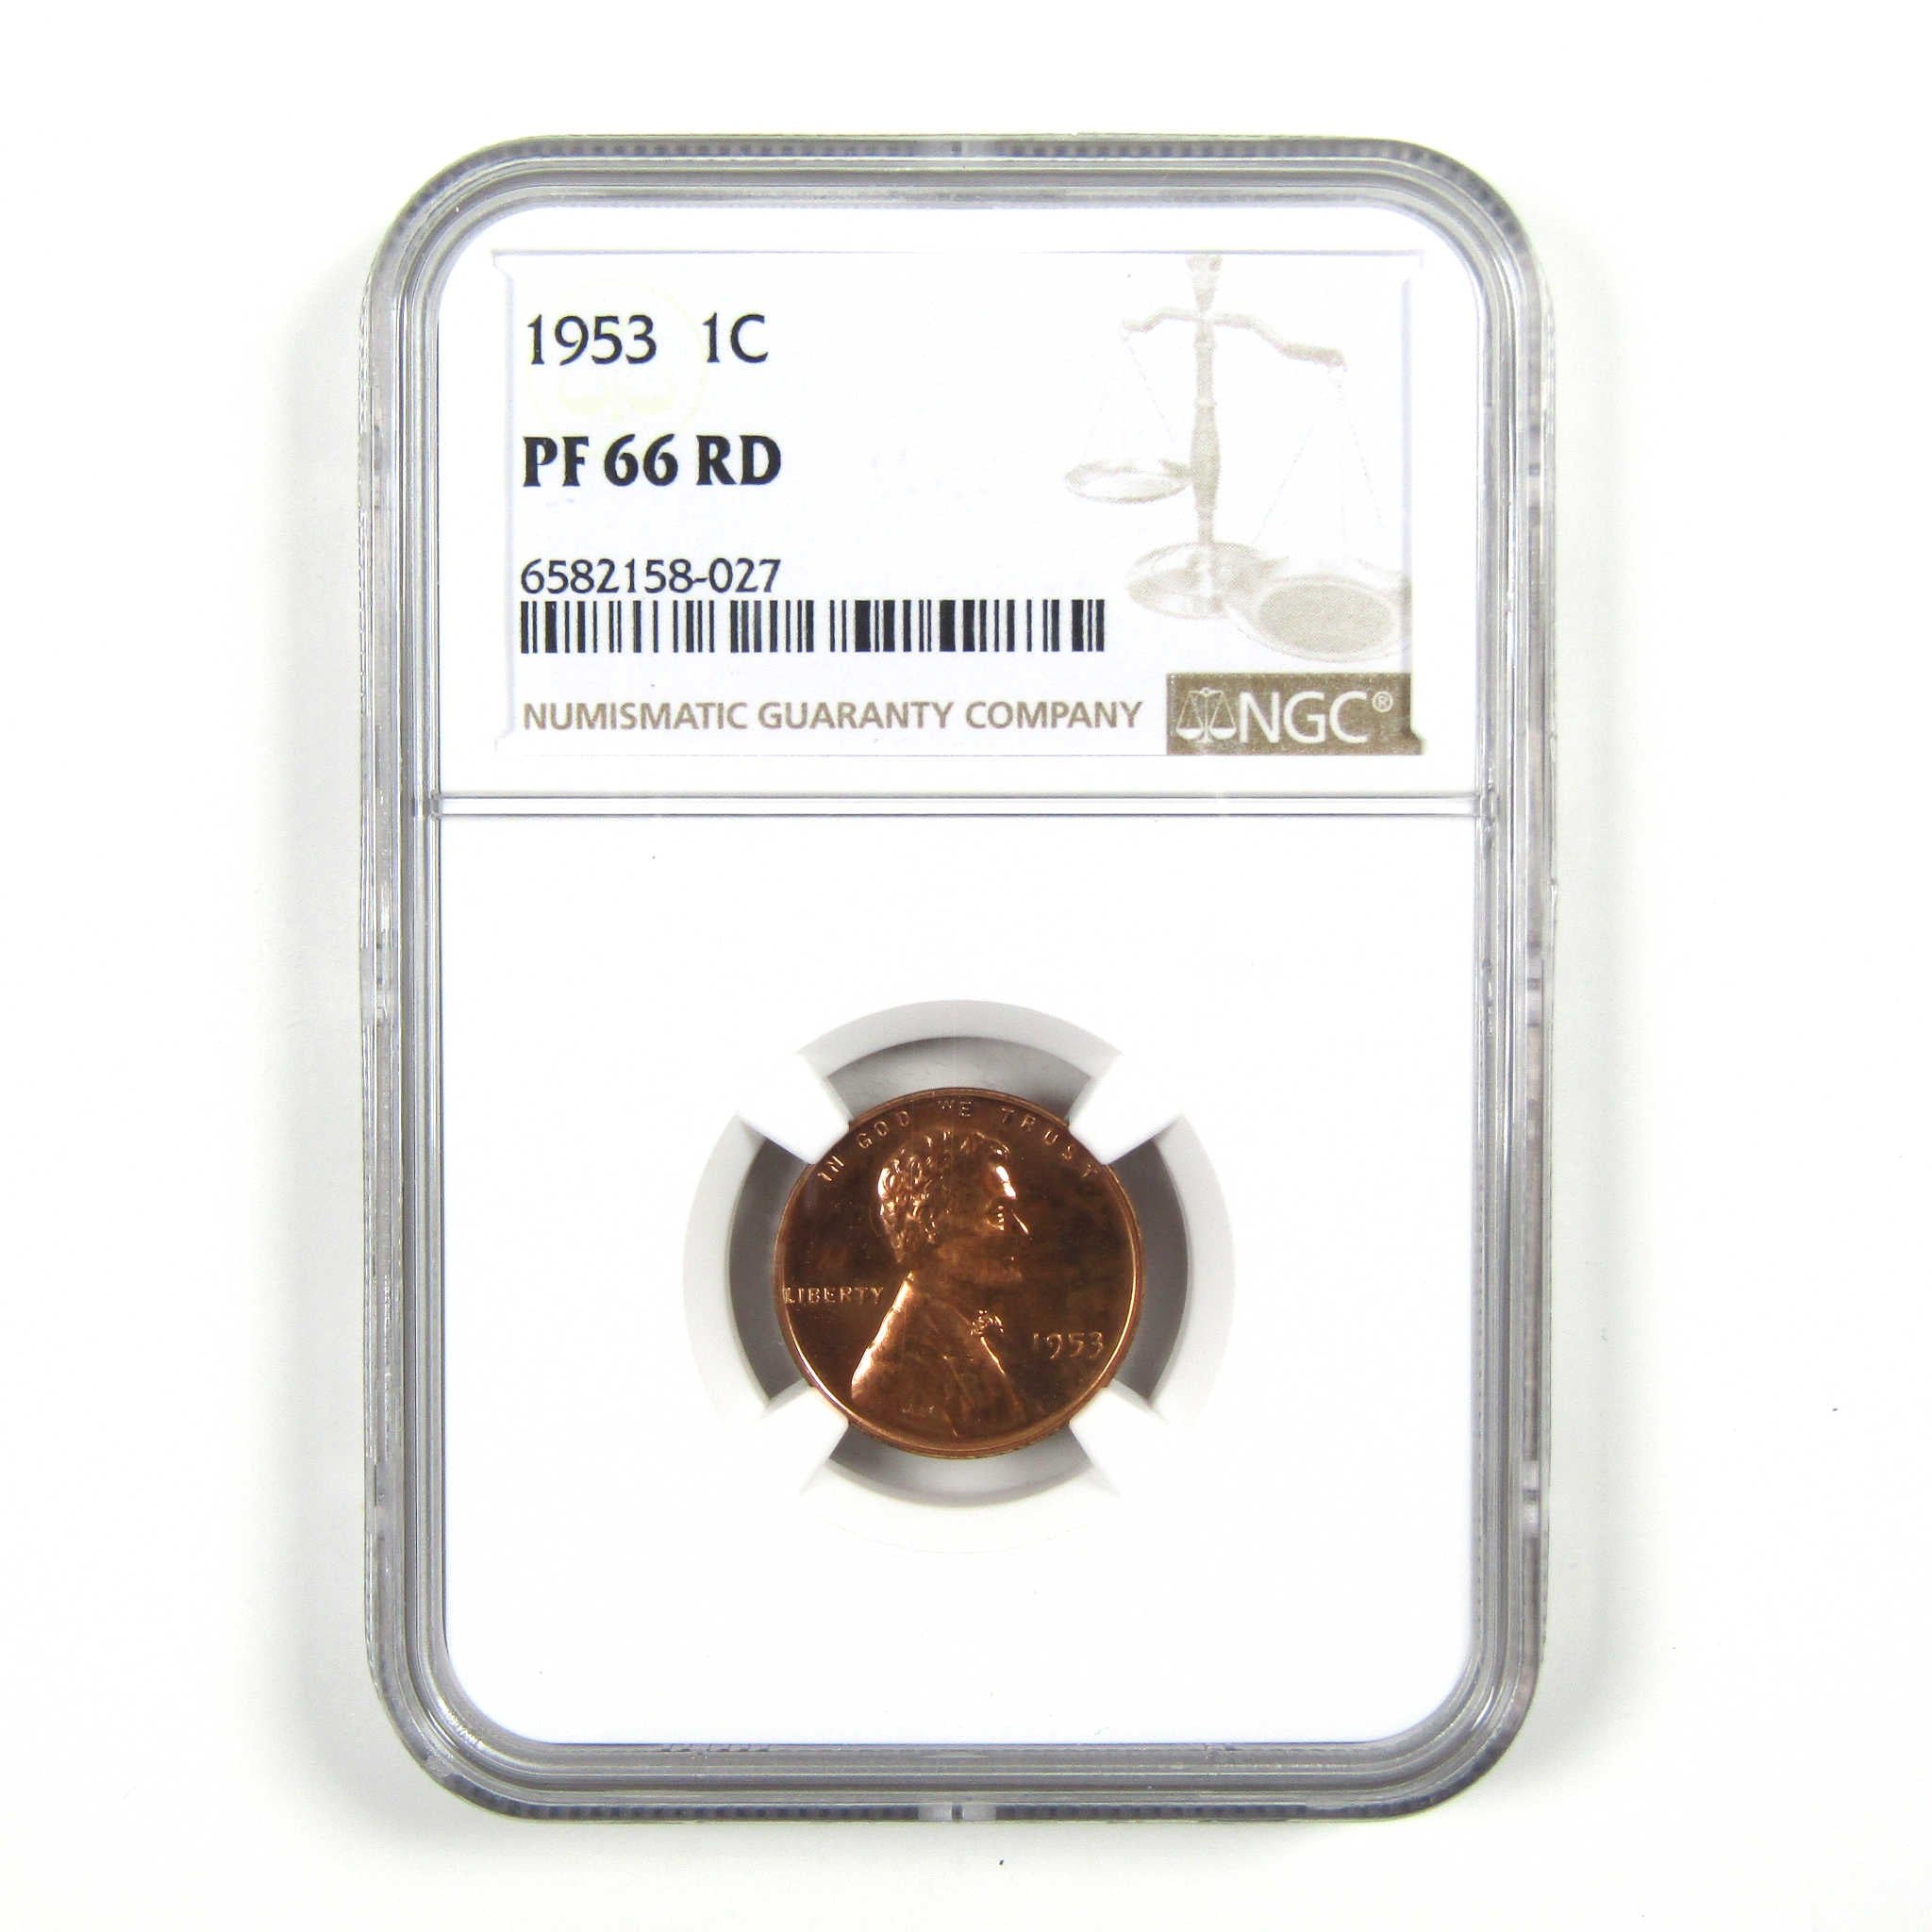 1953 Lincoln Wheat Cent PF 66 RD NGC Penny 1c Proof Coin SKU:I4481